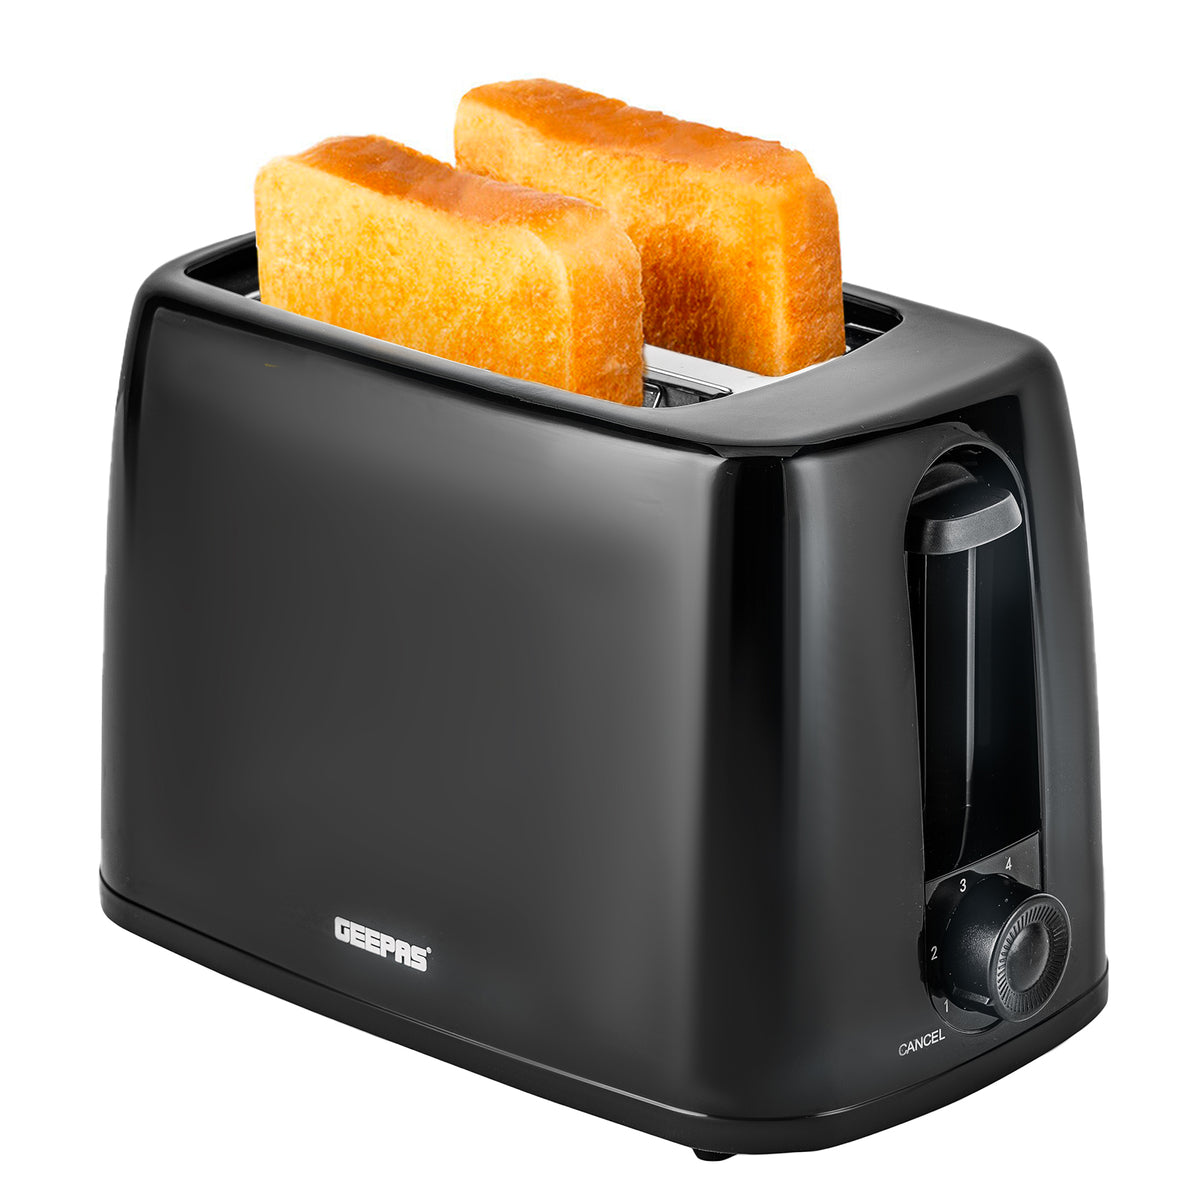 2-Slice Black Bread Toaster With 6 Level Browning Control